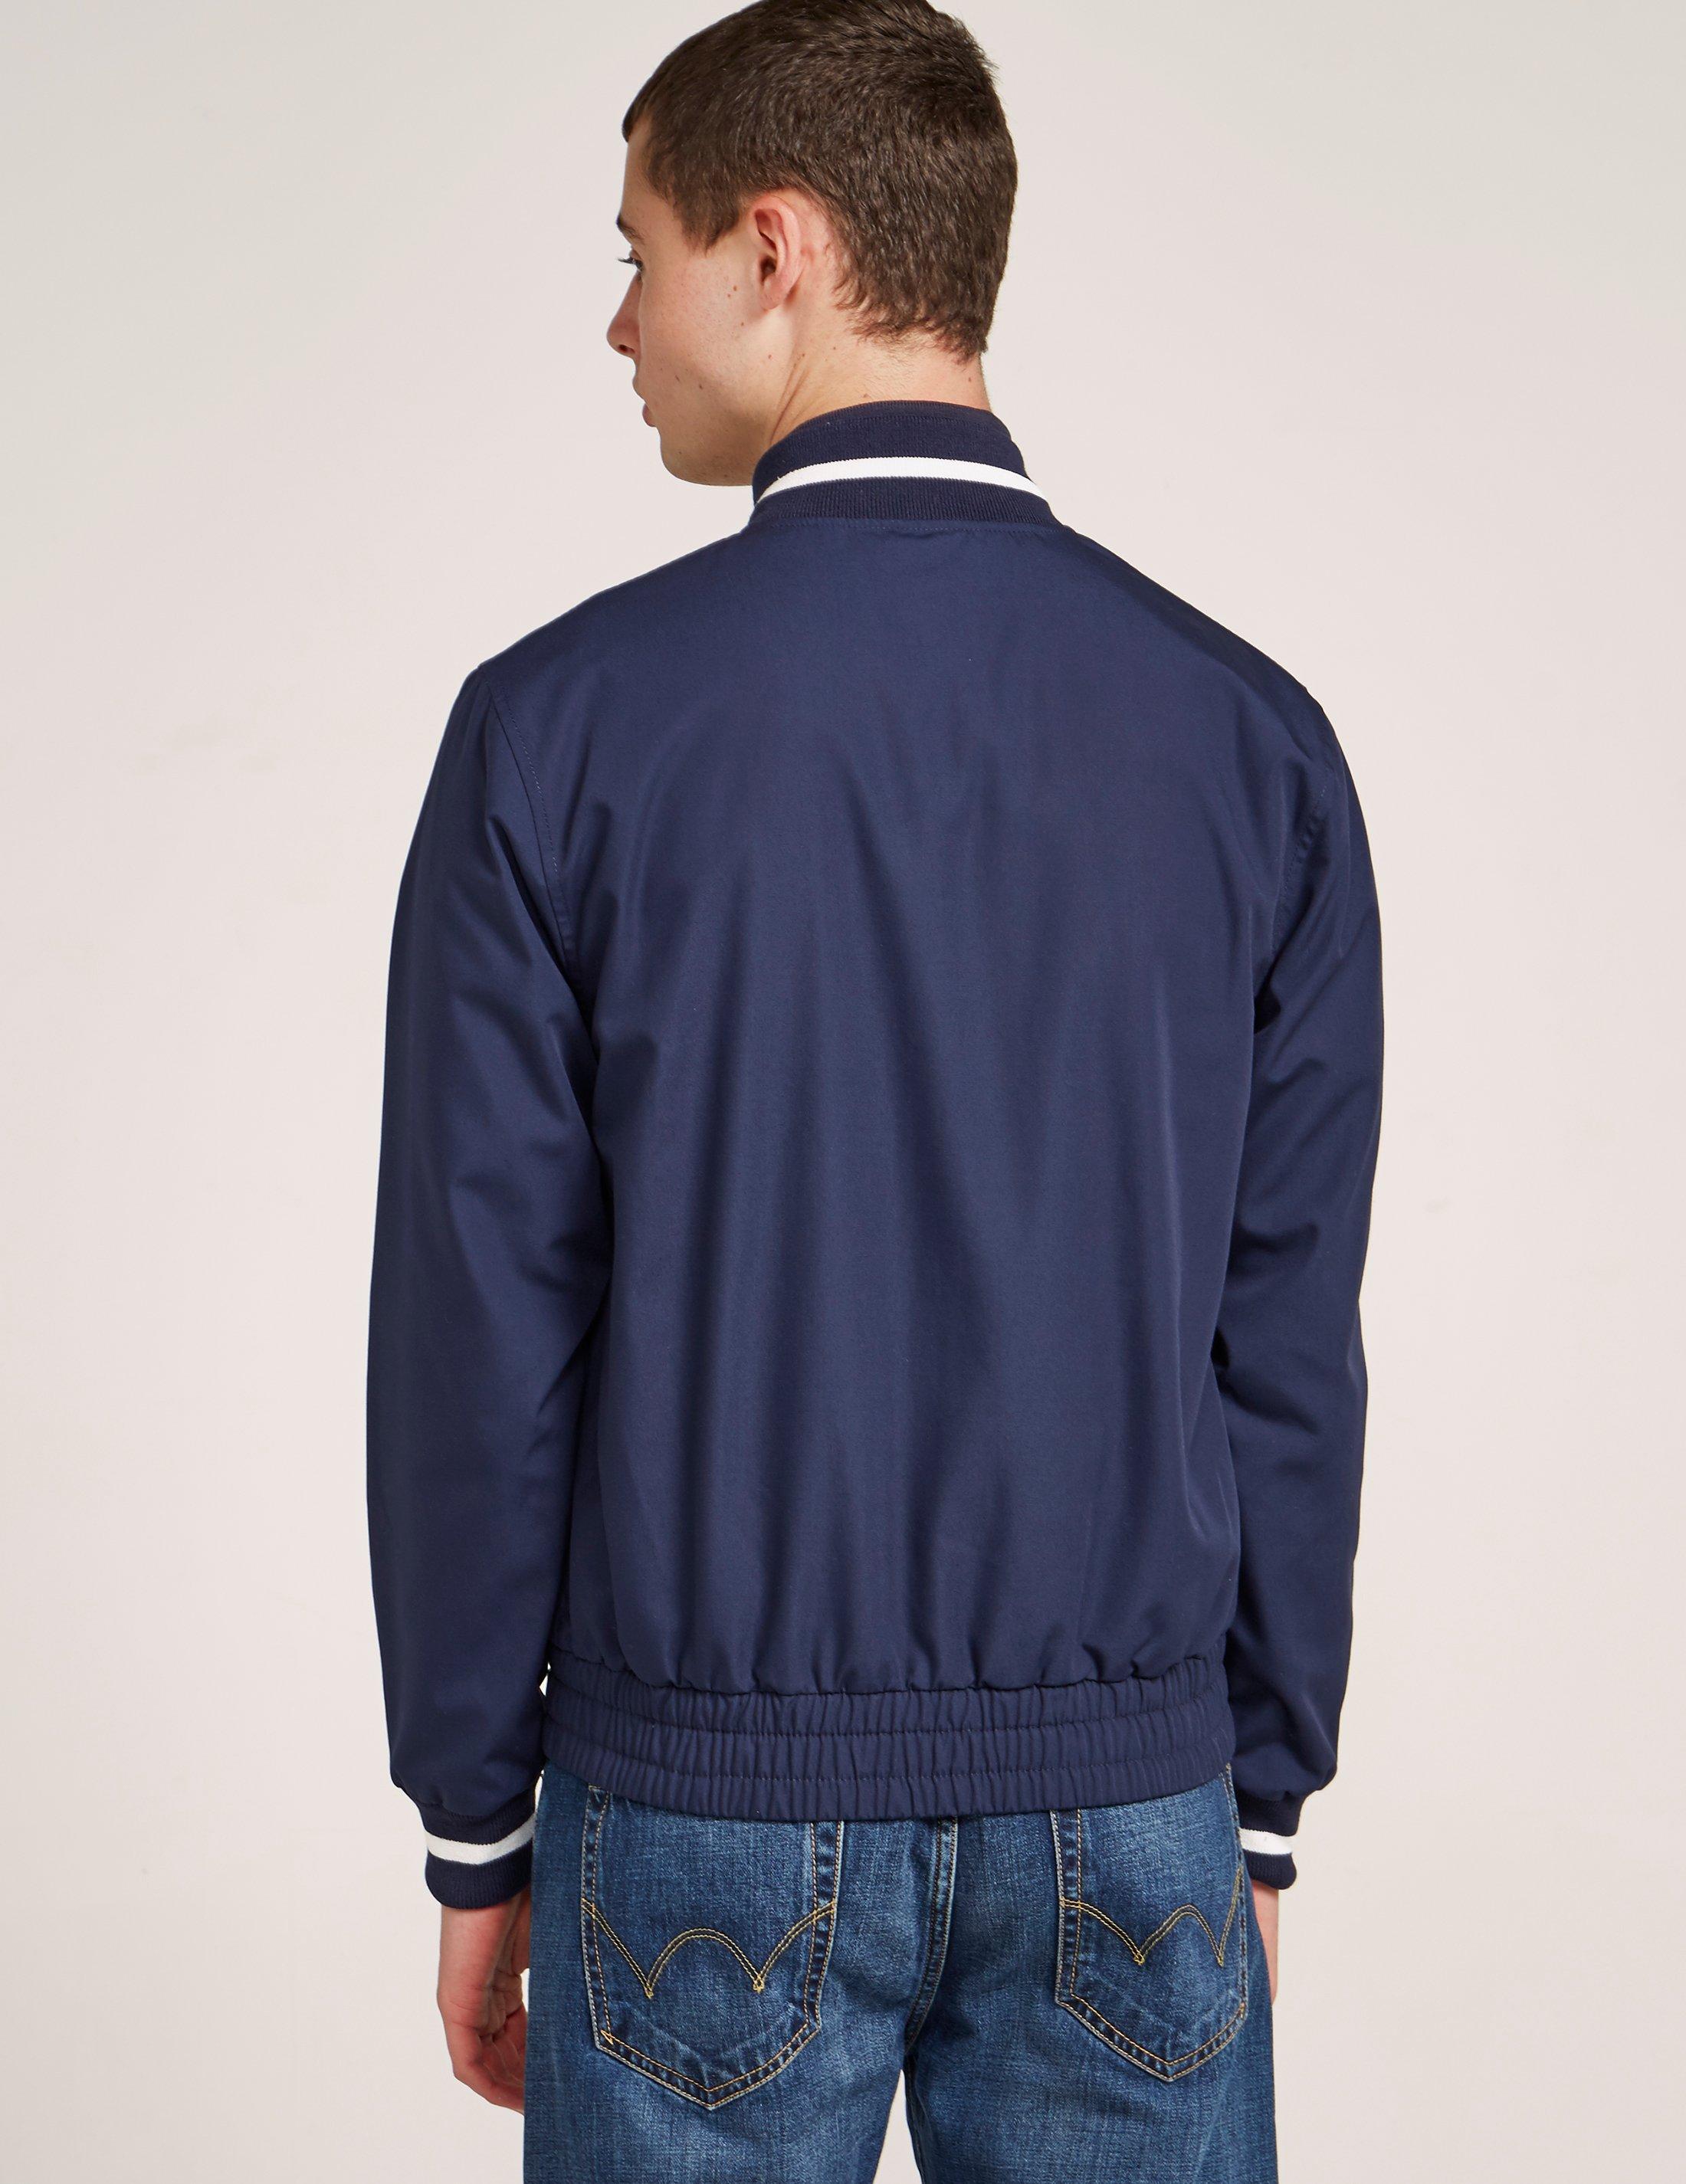 Fred Perry Cotton Reissue Made In England Bomber Jacket In Navy Blue 